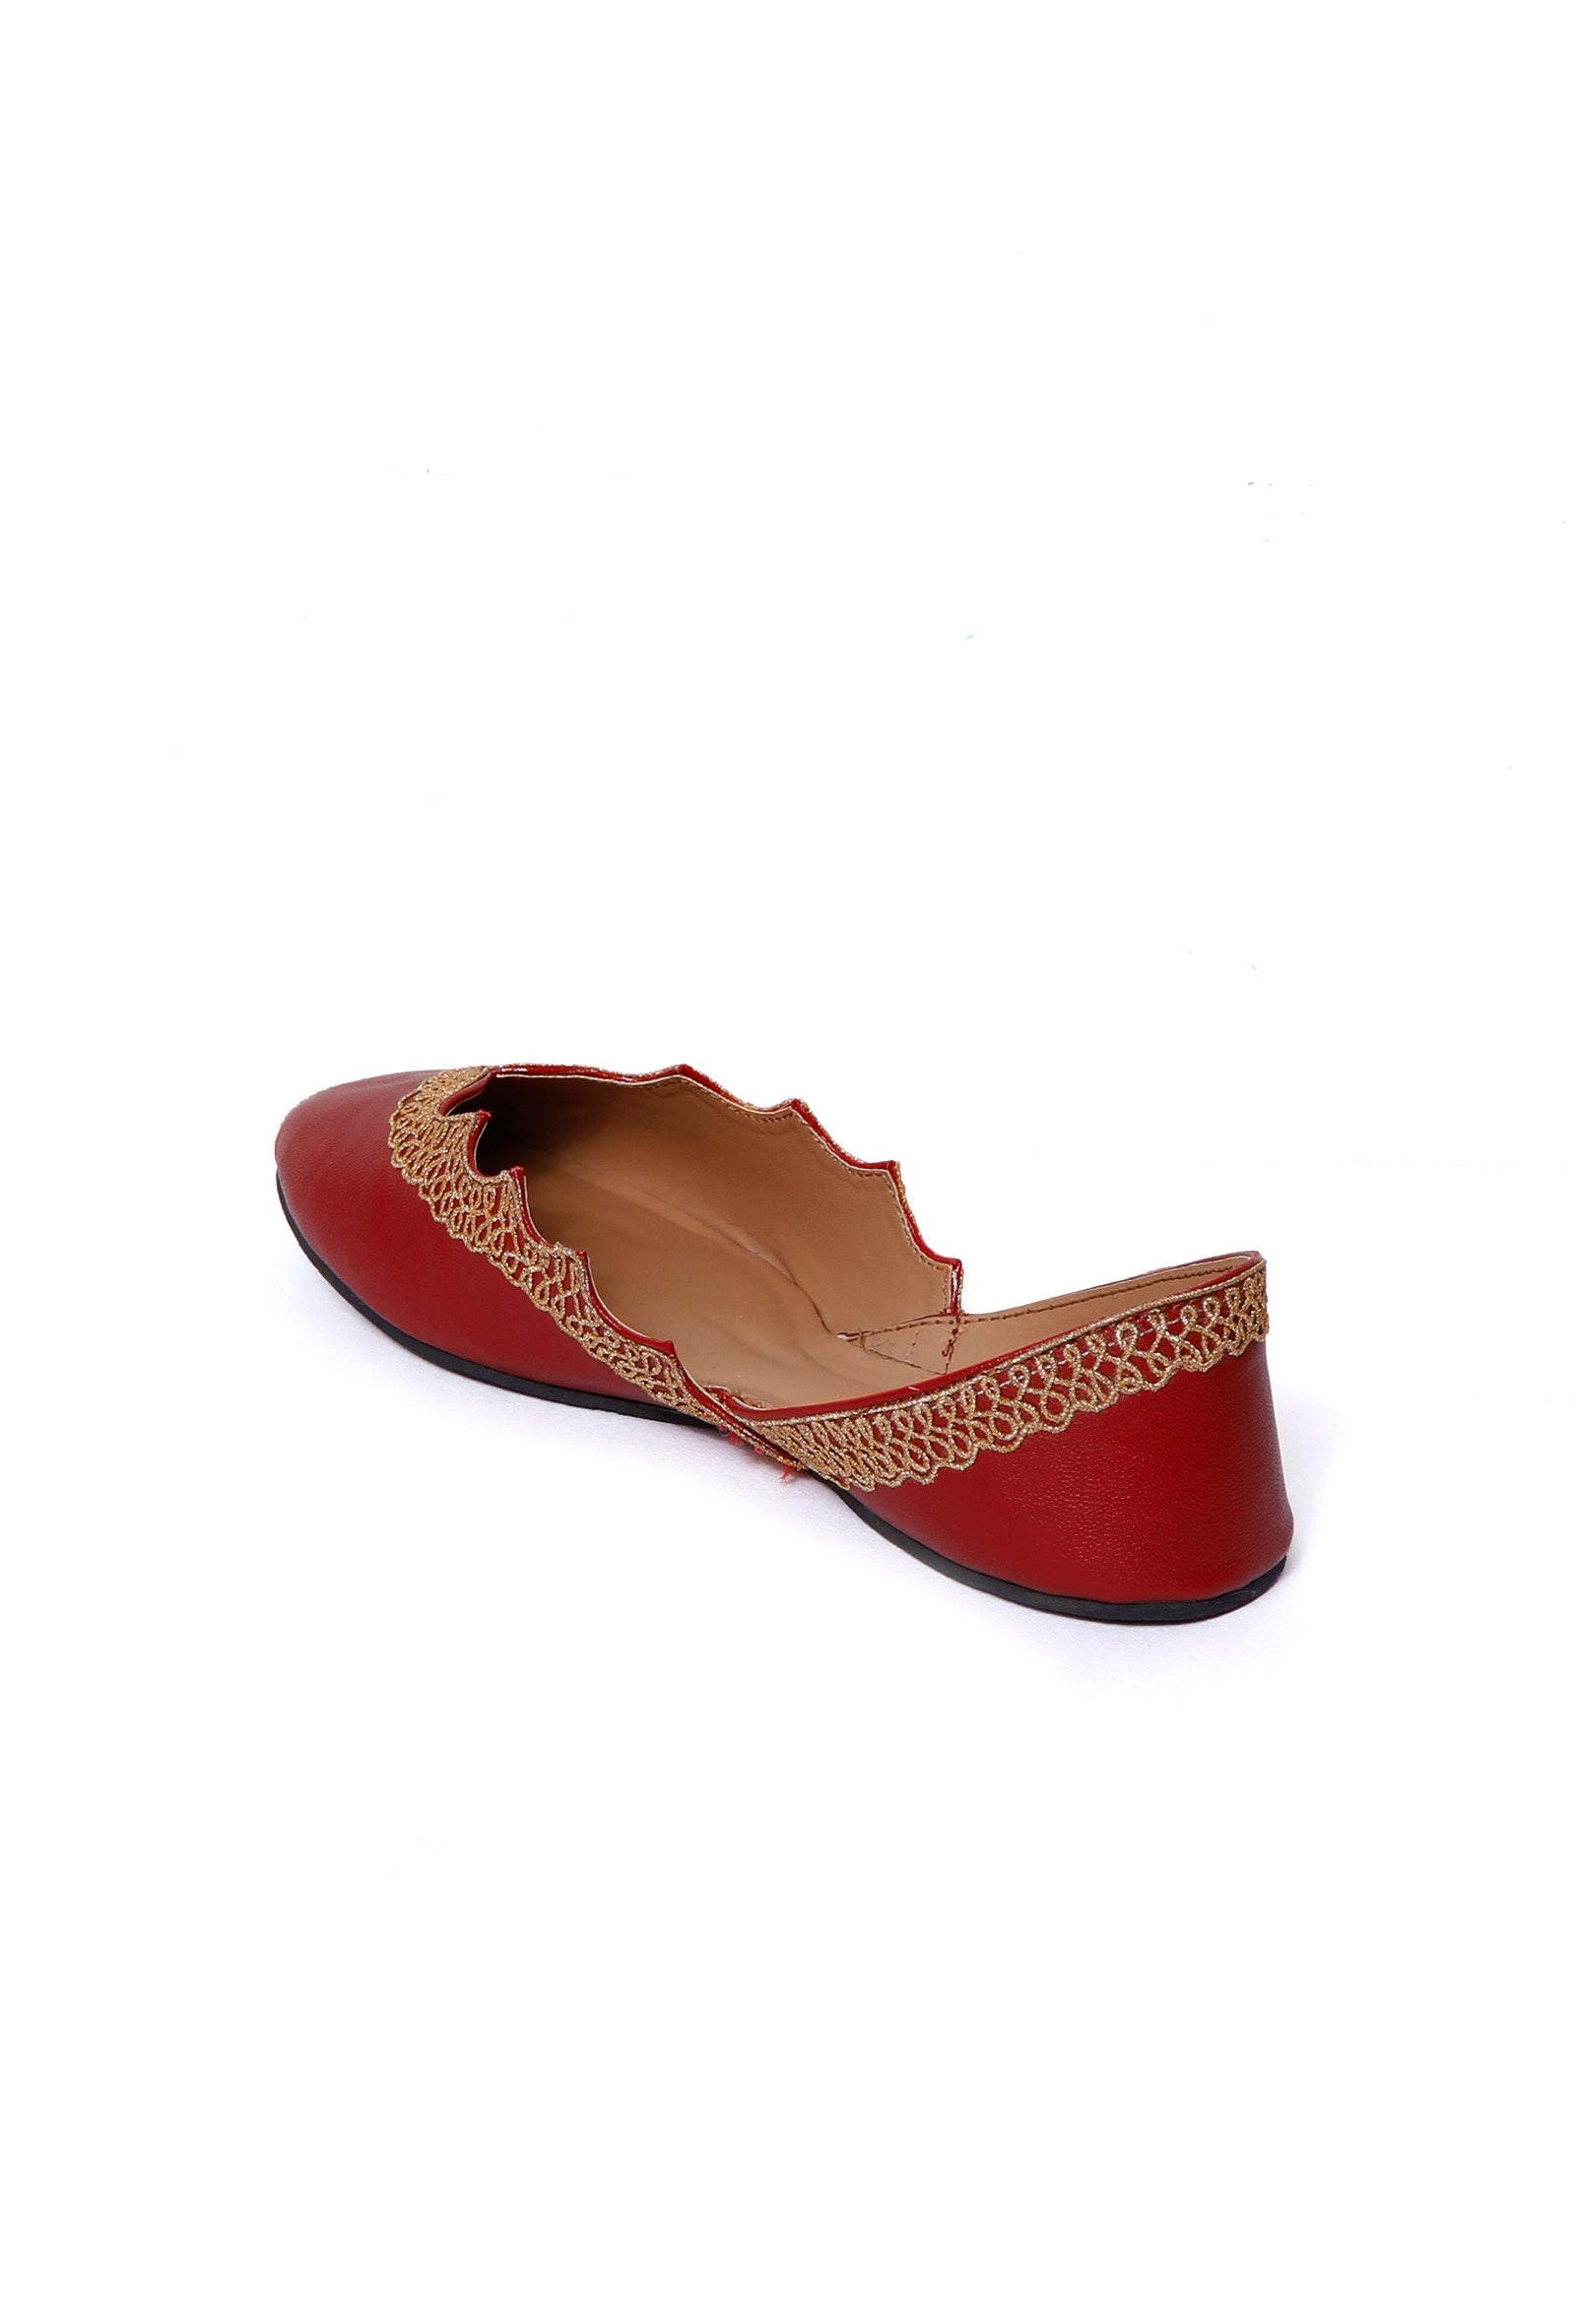 Red cutwork gold embroidered jutti